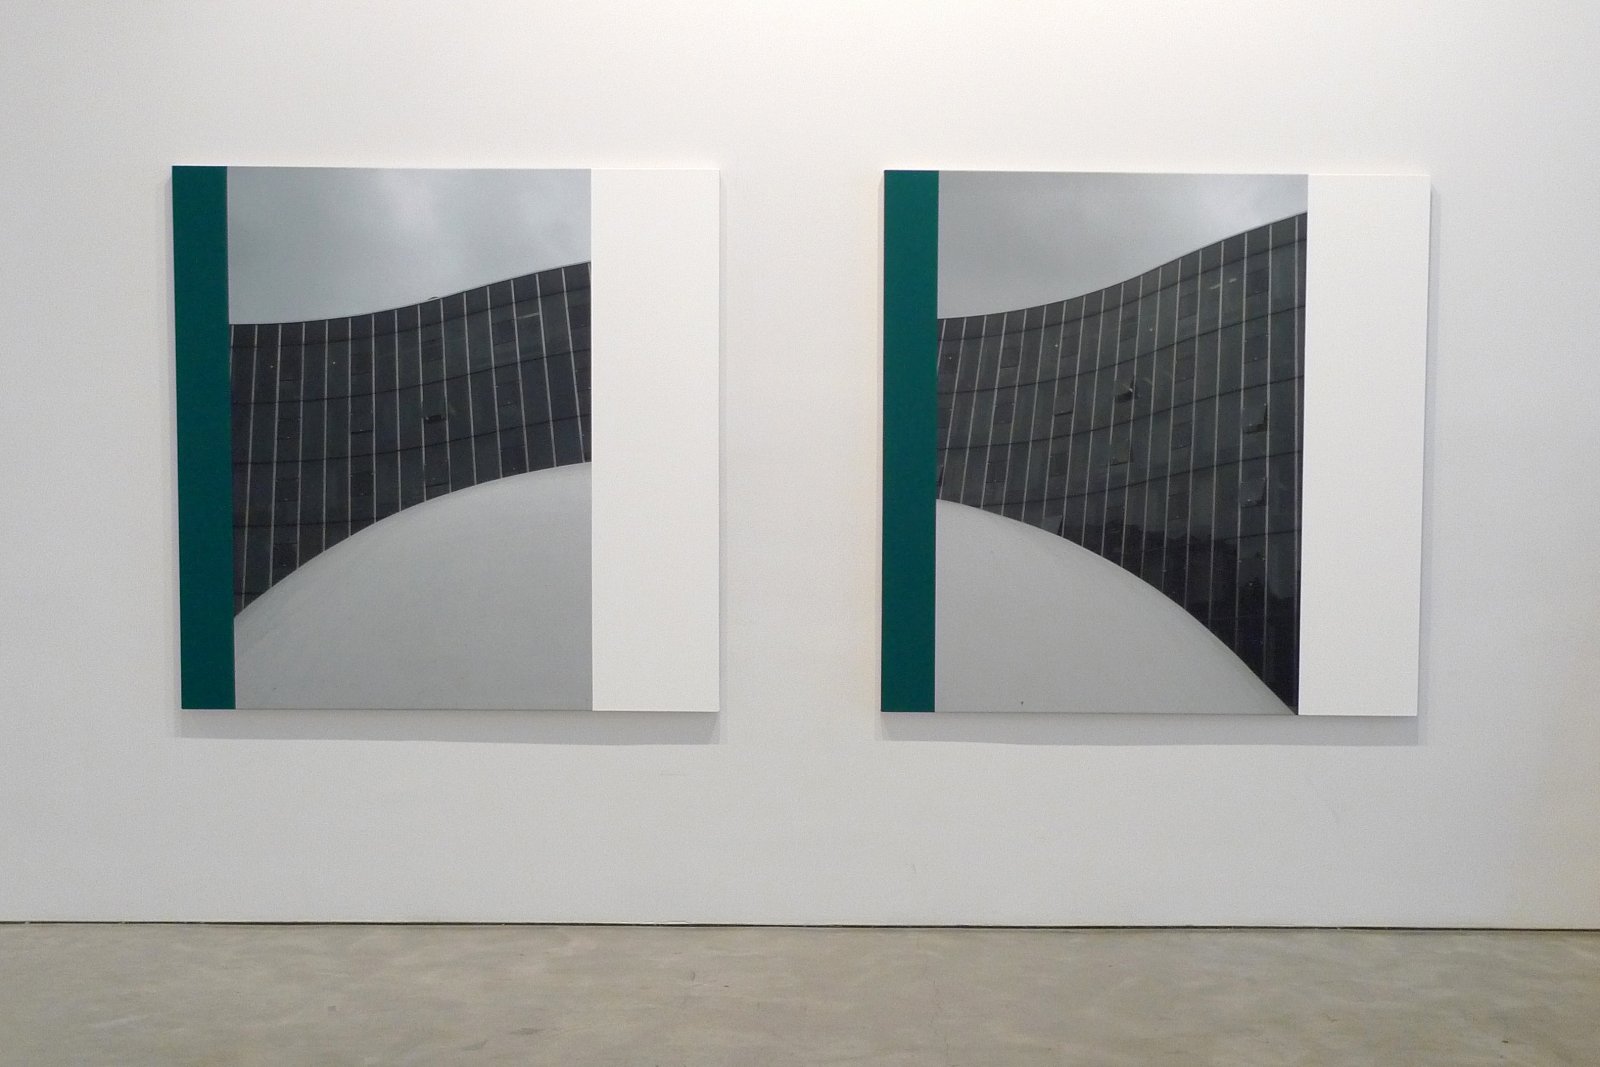 Ian Wallace, PCF Paris Exterior I (installation view), 2009, photolaminate with acrylic on canvas, 60 x 60 in. (152 x 152 cm)